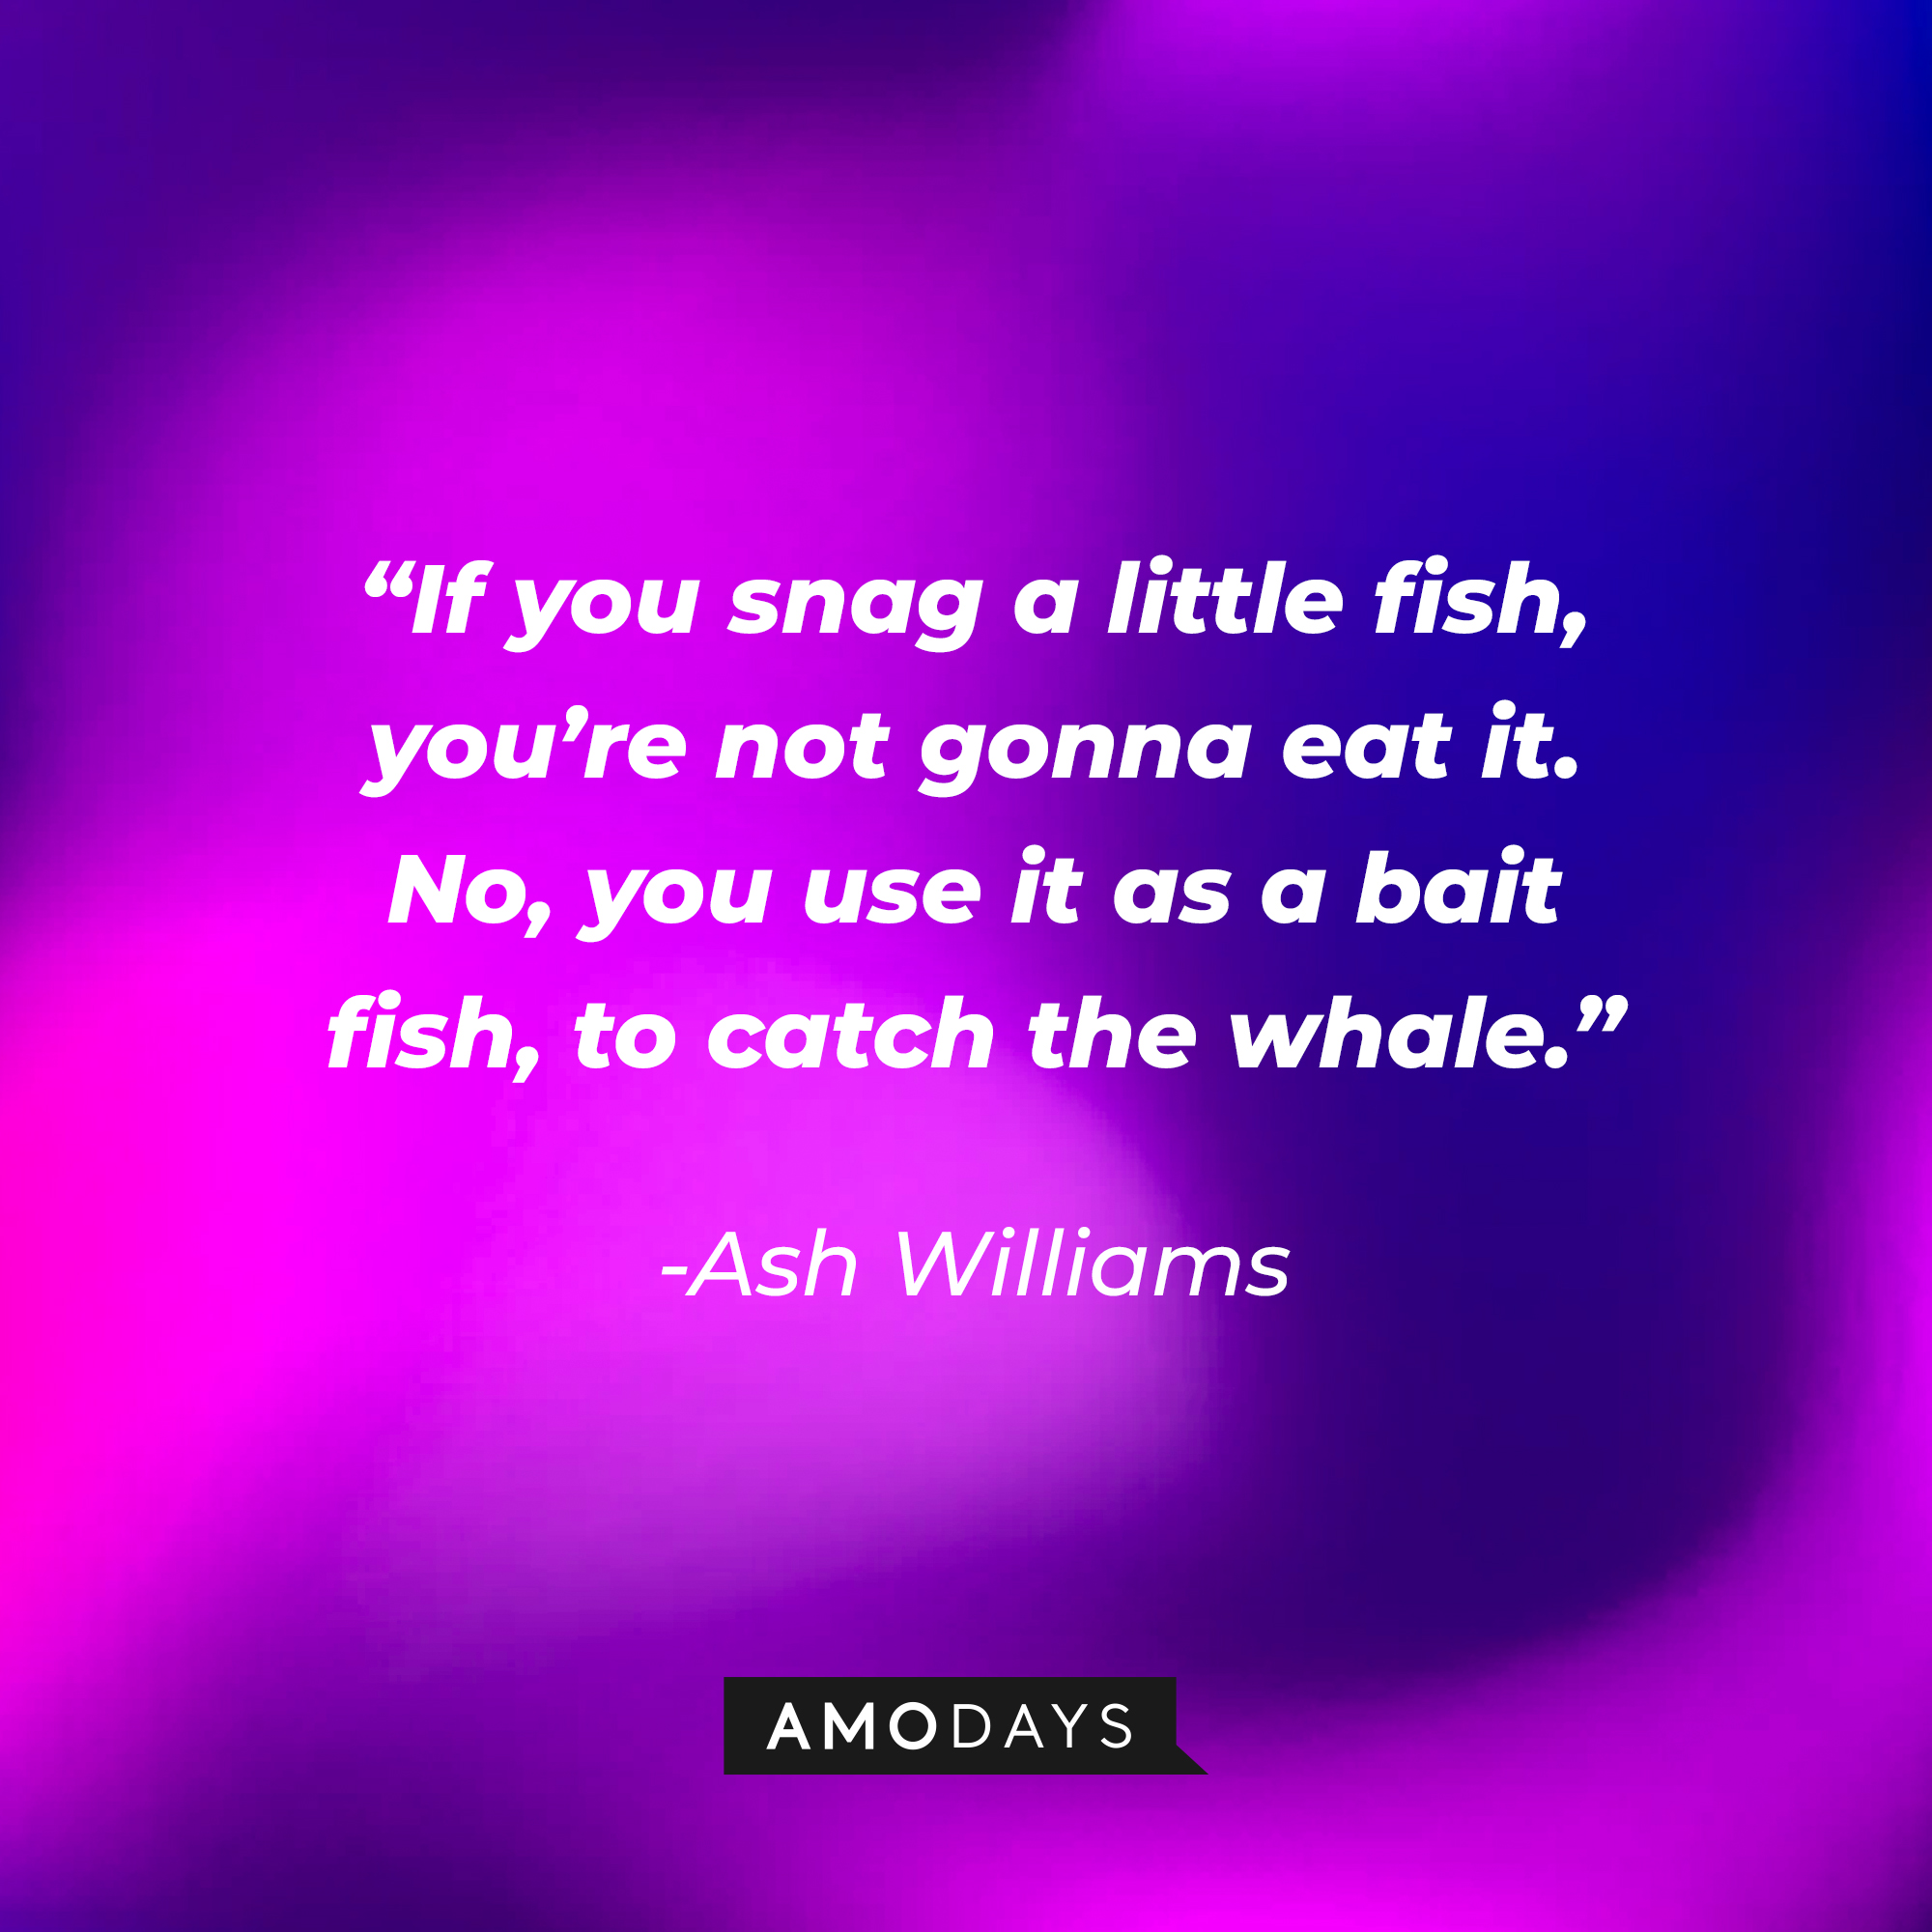 Ash Williams' quote: “If you snag a little fish, you’re not gonna eat it. No, you use it as a bait fish, to catch the whale.” | Source: Amodays